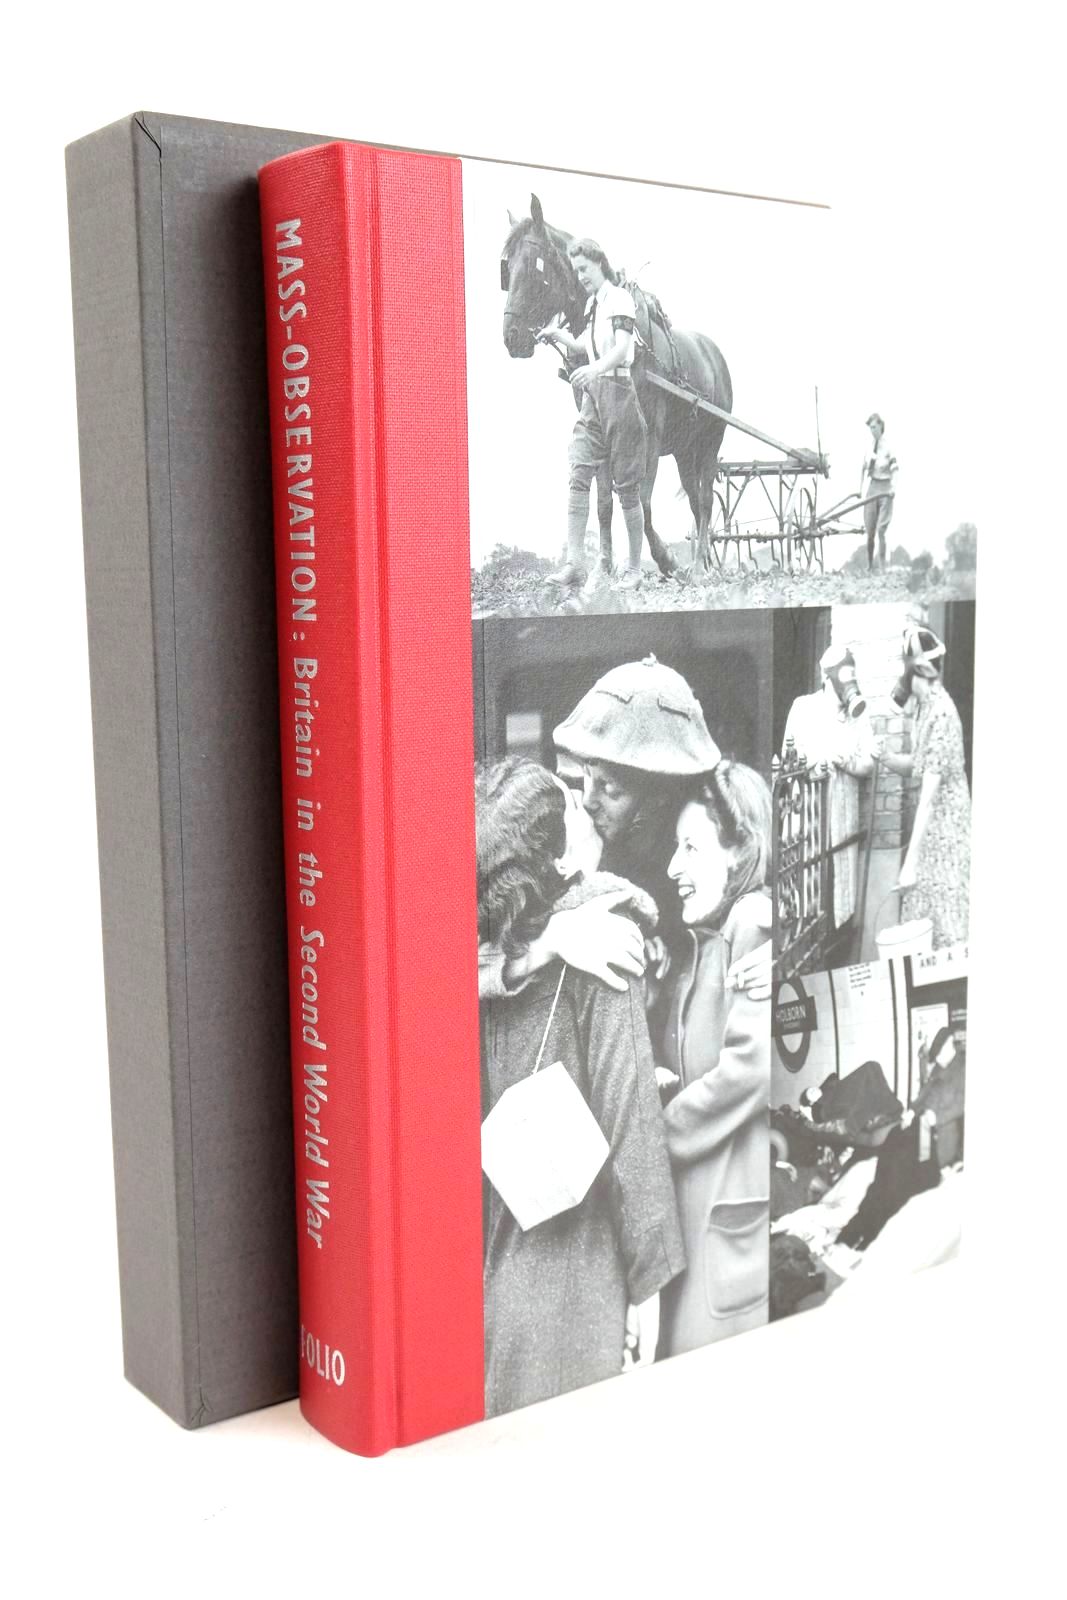 Photo of MASS-OBSERVATION BRITAIN IN THE SECOND WORLD WAR written by Wing, Sandra Koa published by Folio Society (STOCK CODE: 1326768)  for sale by Stella & Rose's Books